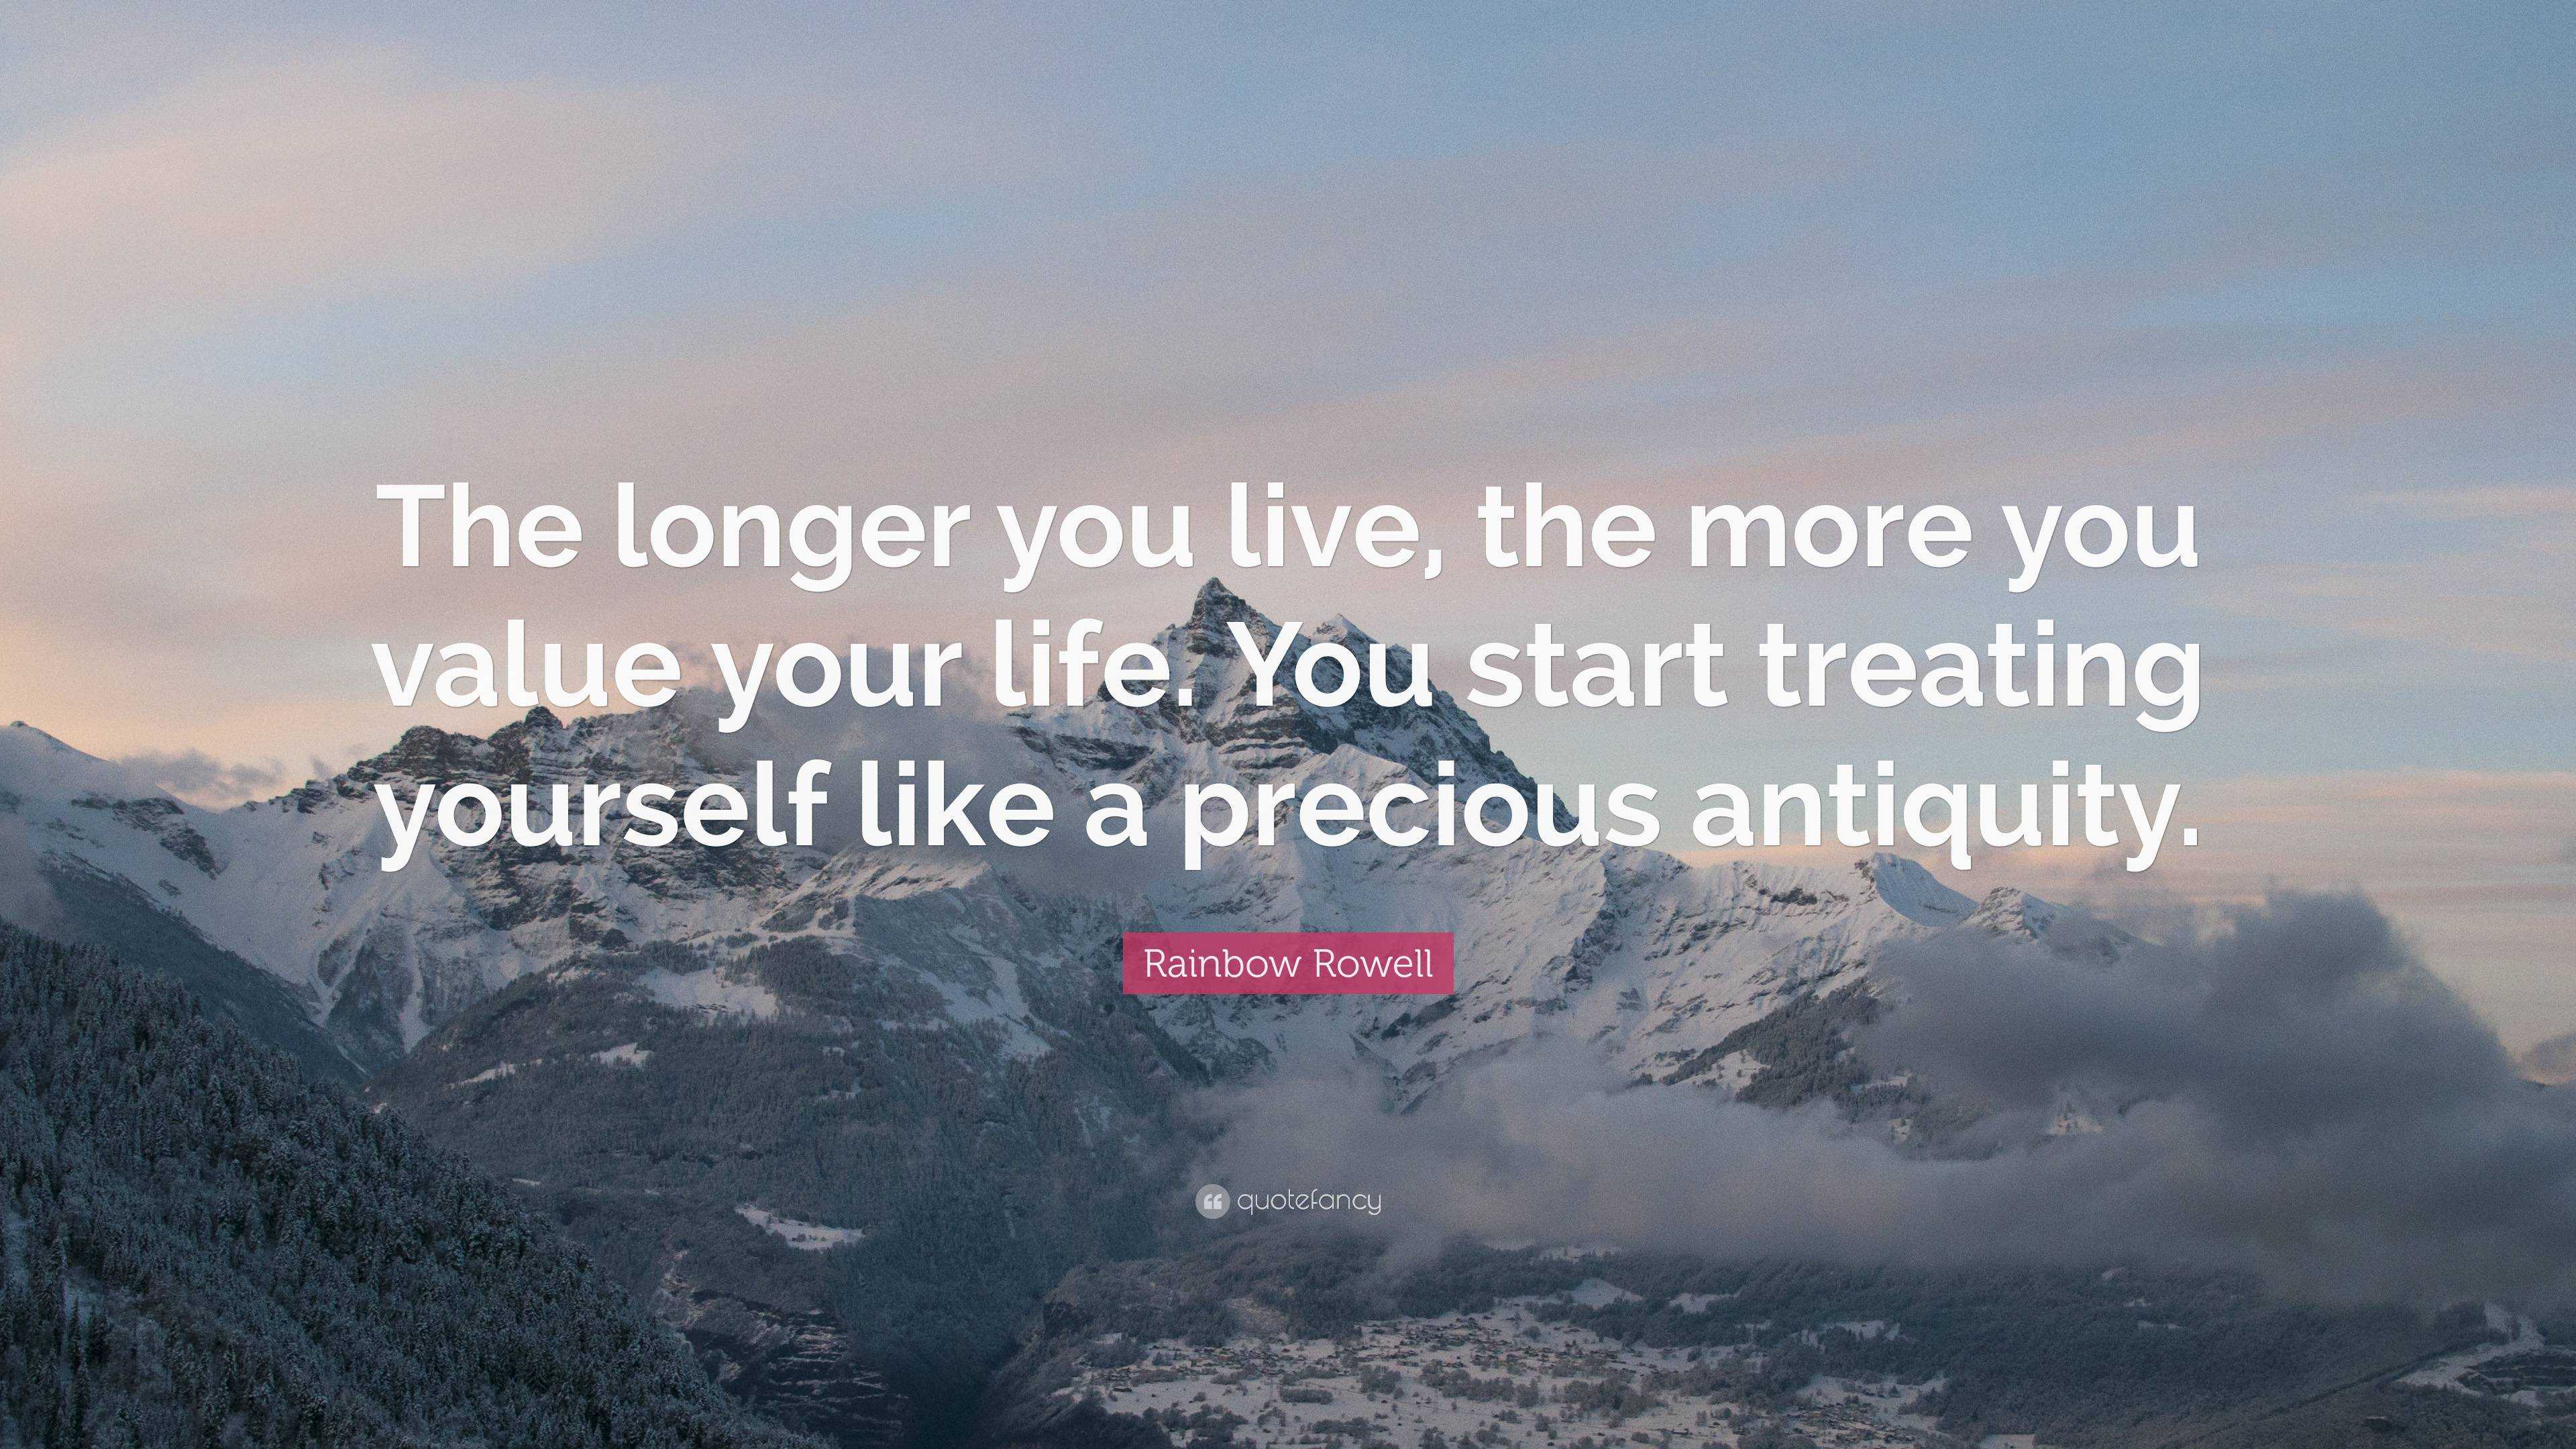 Rainbow Rowell Quote: “The longer you live, the more you value your ...